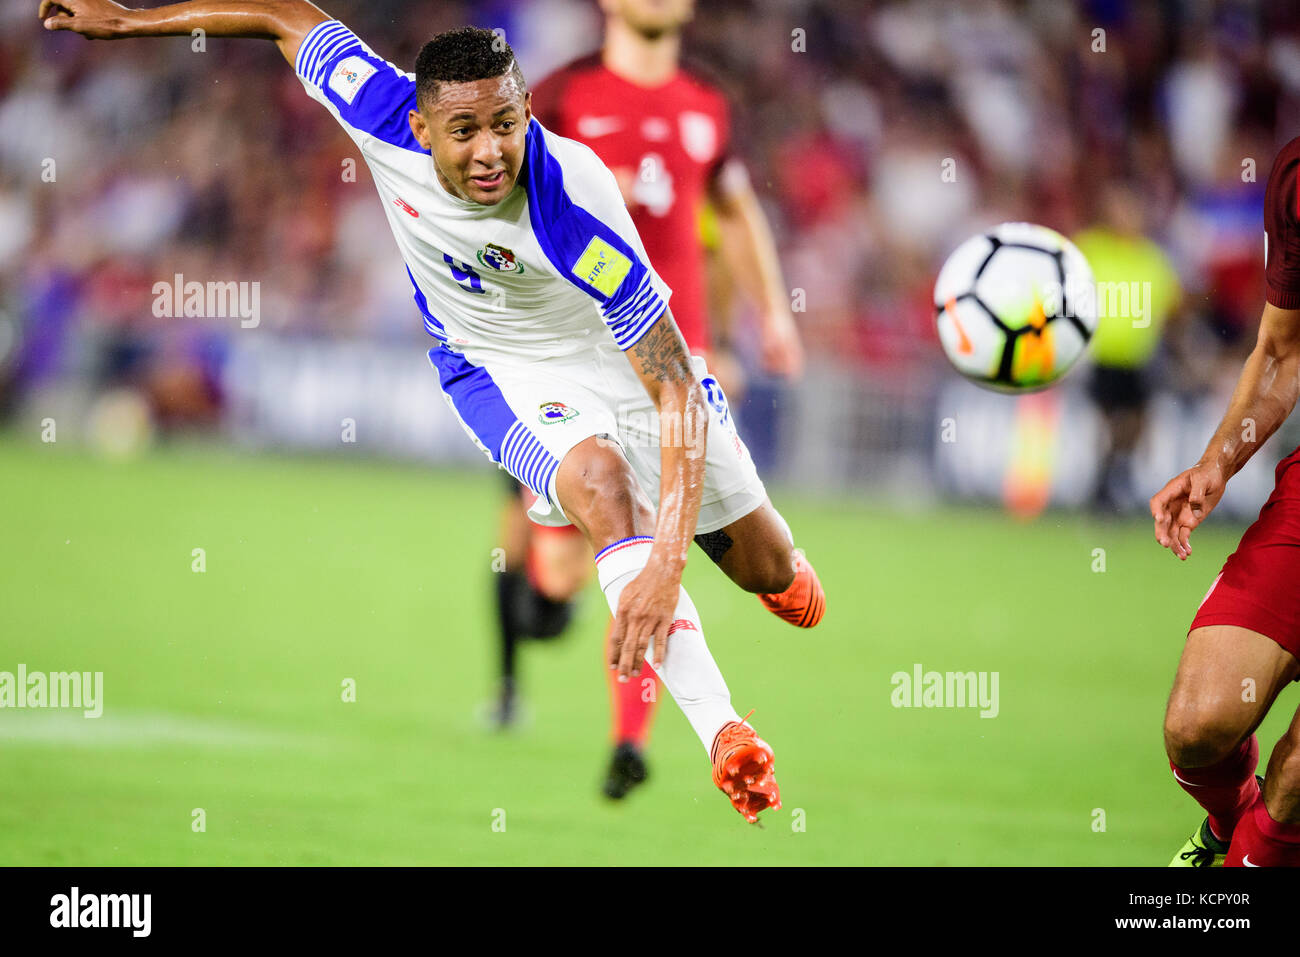 Orlando, USA. 6th Oct, 2017. Panama Forward Gabriel Torres (9) during the Men's International Soccer World Cup Qualifier match between Panama and the United States at Orlando City Stadium in Orlando, FL. Credit: Cal Sport Media/Alamy Live News Stock Photo